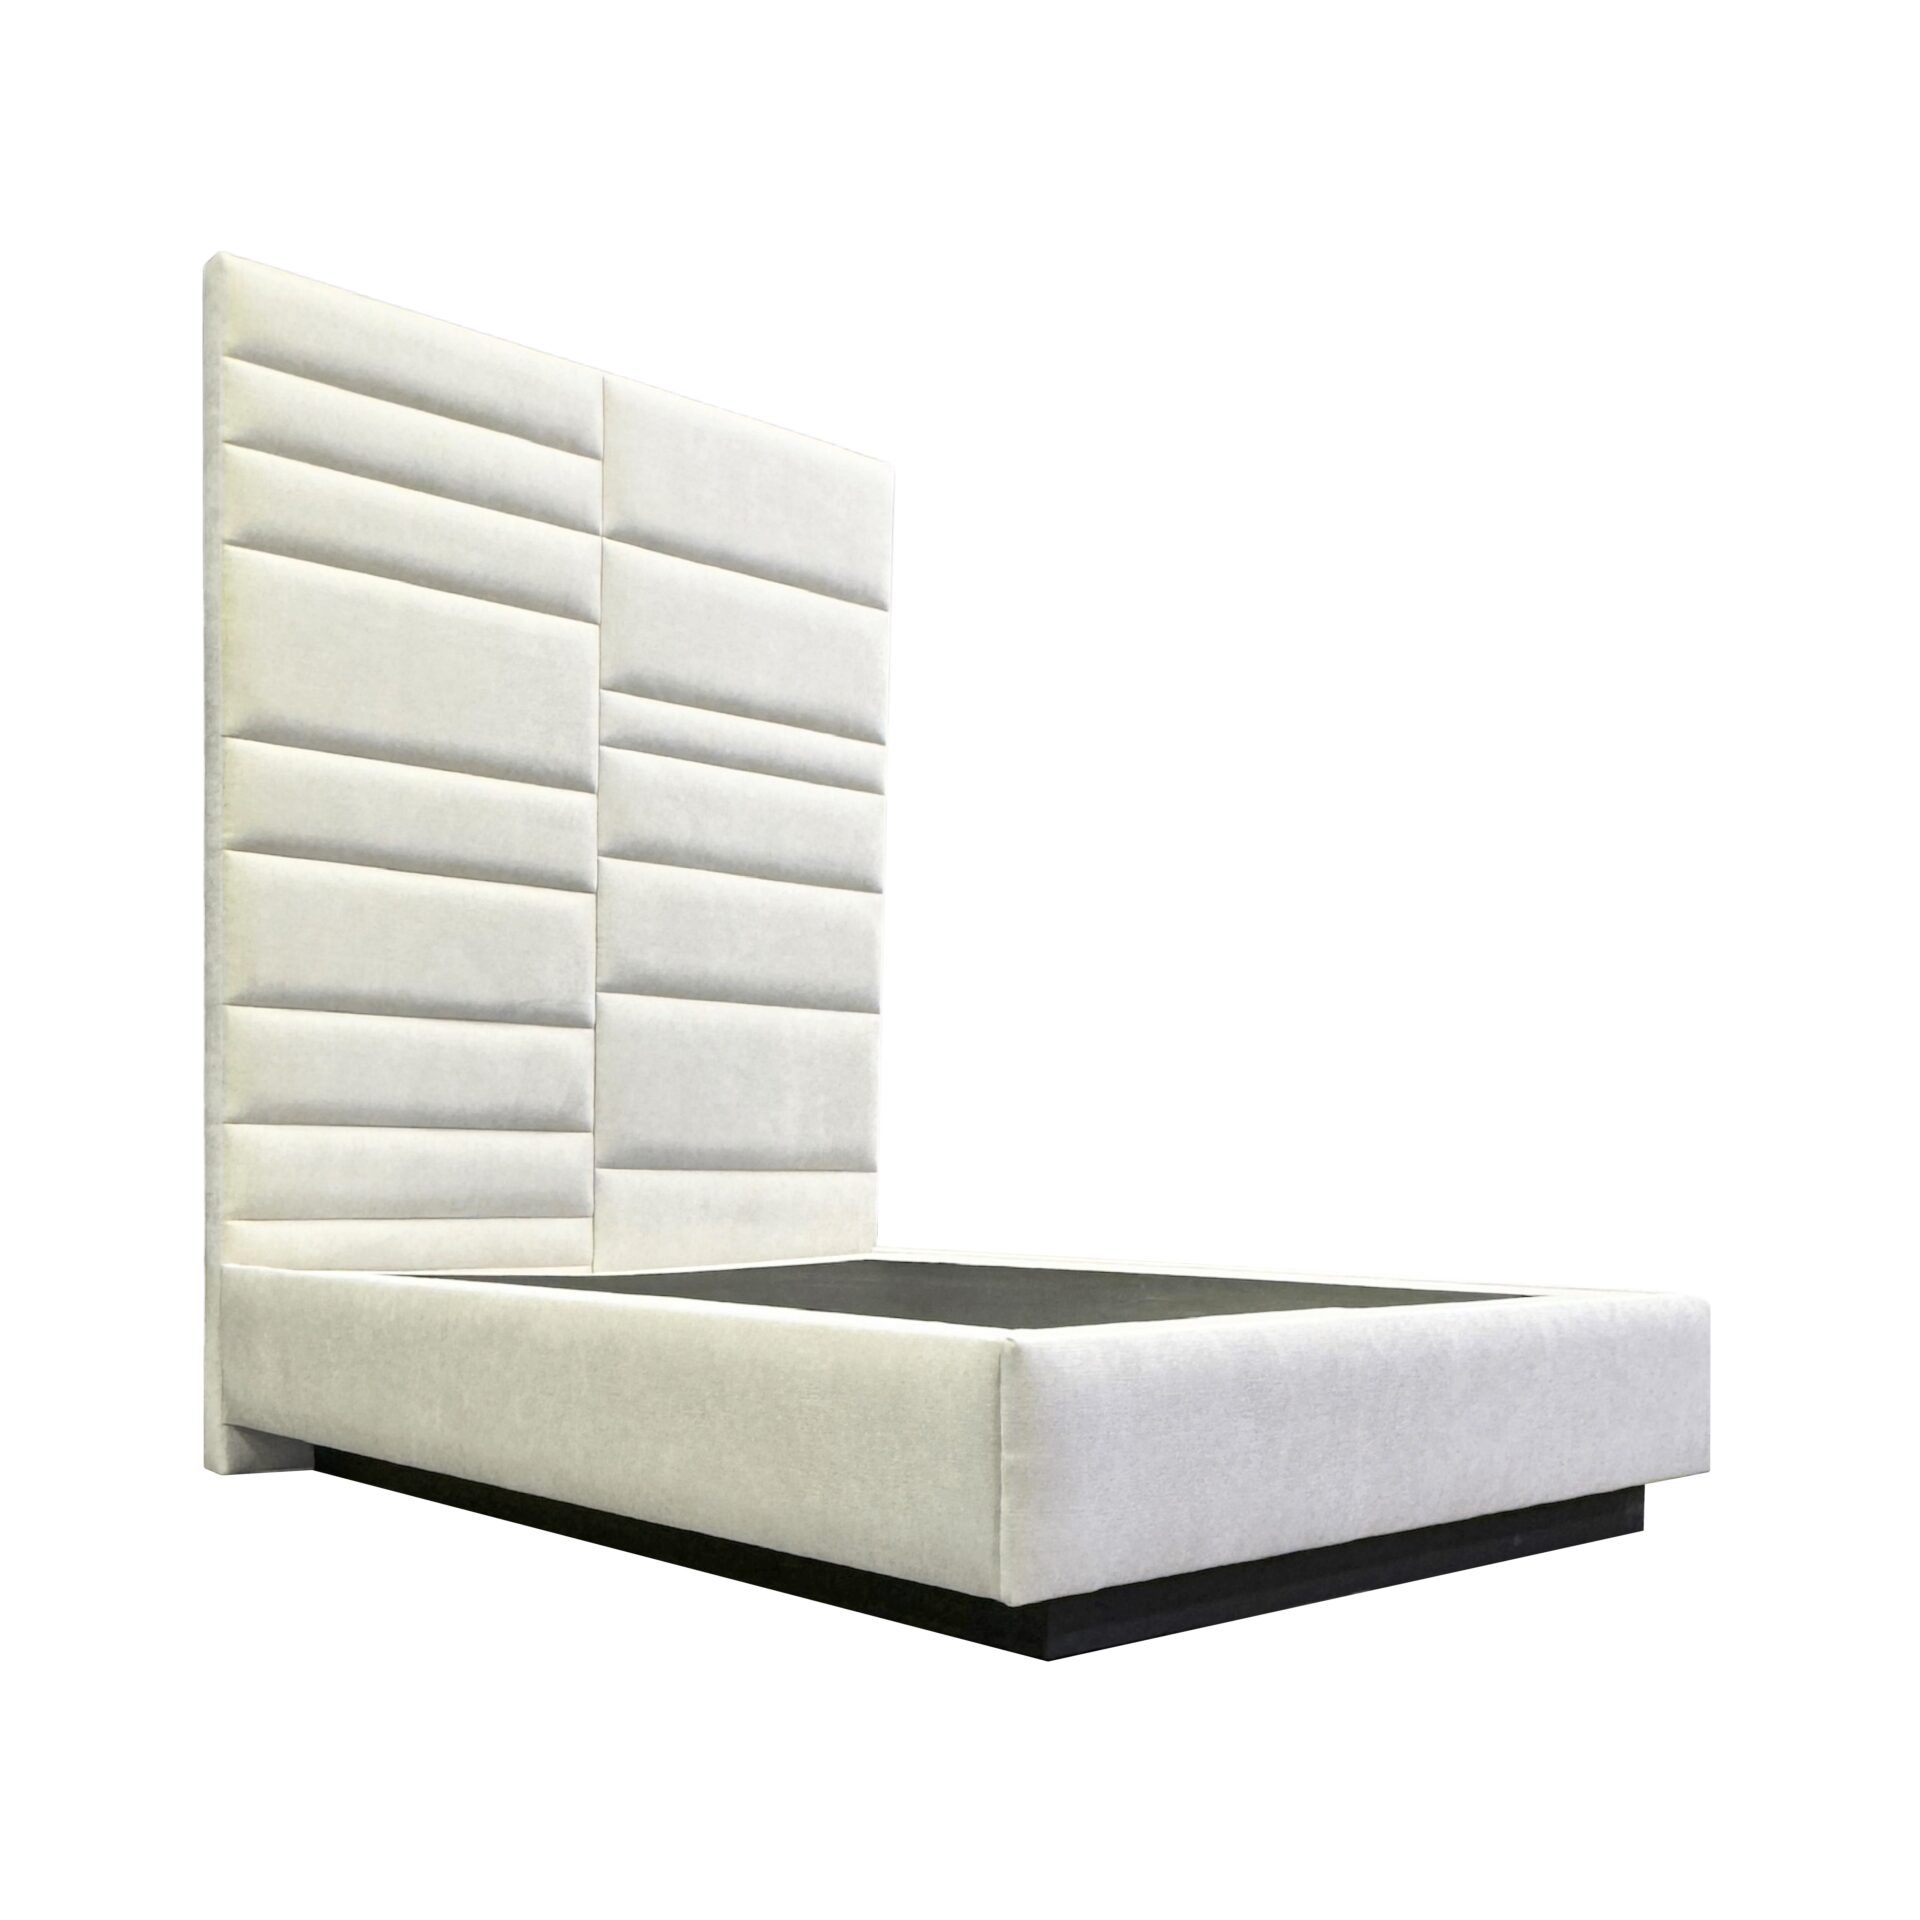 MIRAGE-S-freestanding-upholstered-bed-luxury-furniture-blend-home-furnishings